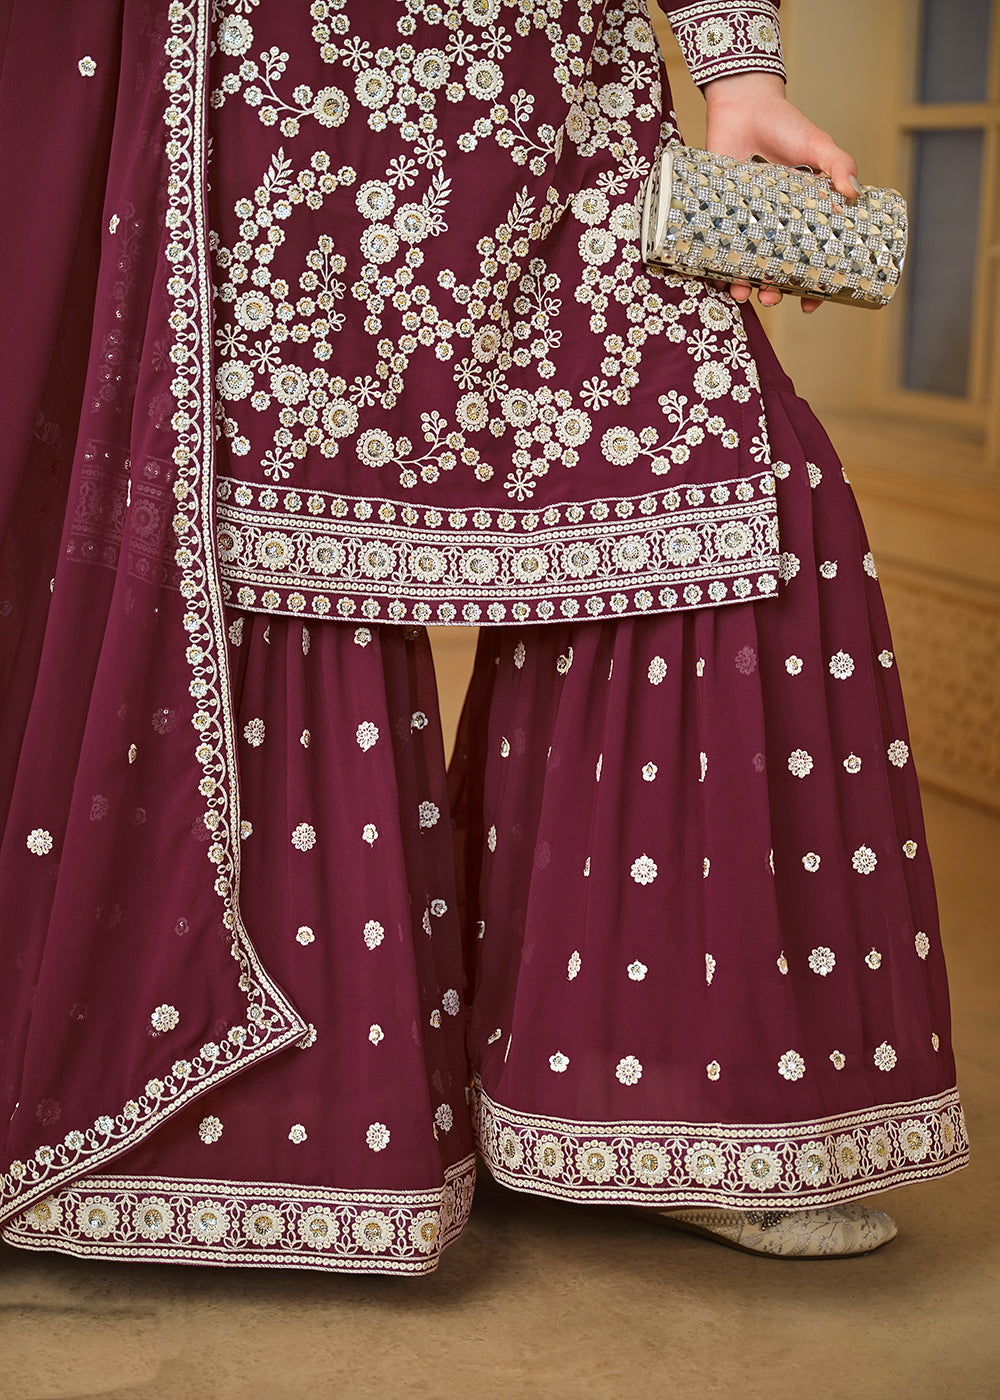 Shop Now Burgundy Wine Embroidered Georgette Gharara Style Suit Online at Empress Clothing in USA, UK, Canada, Italy & Worldwide. 